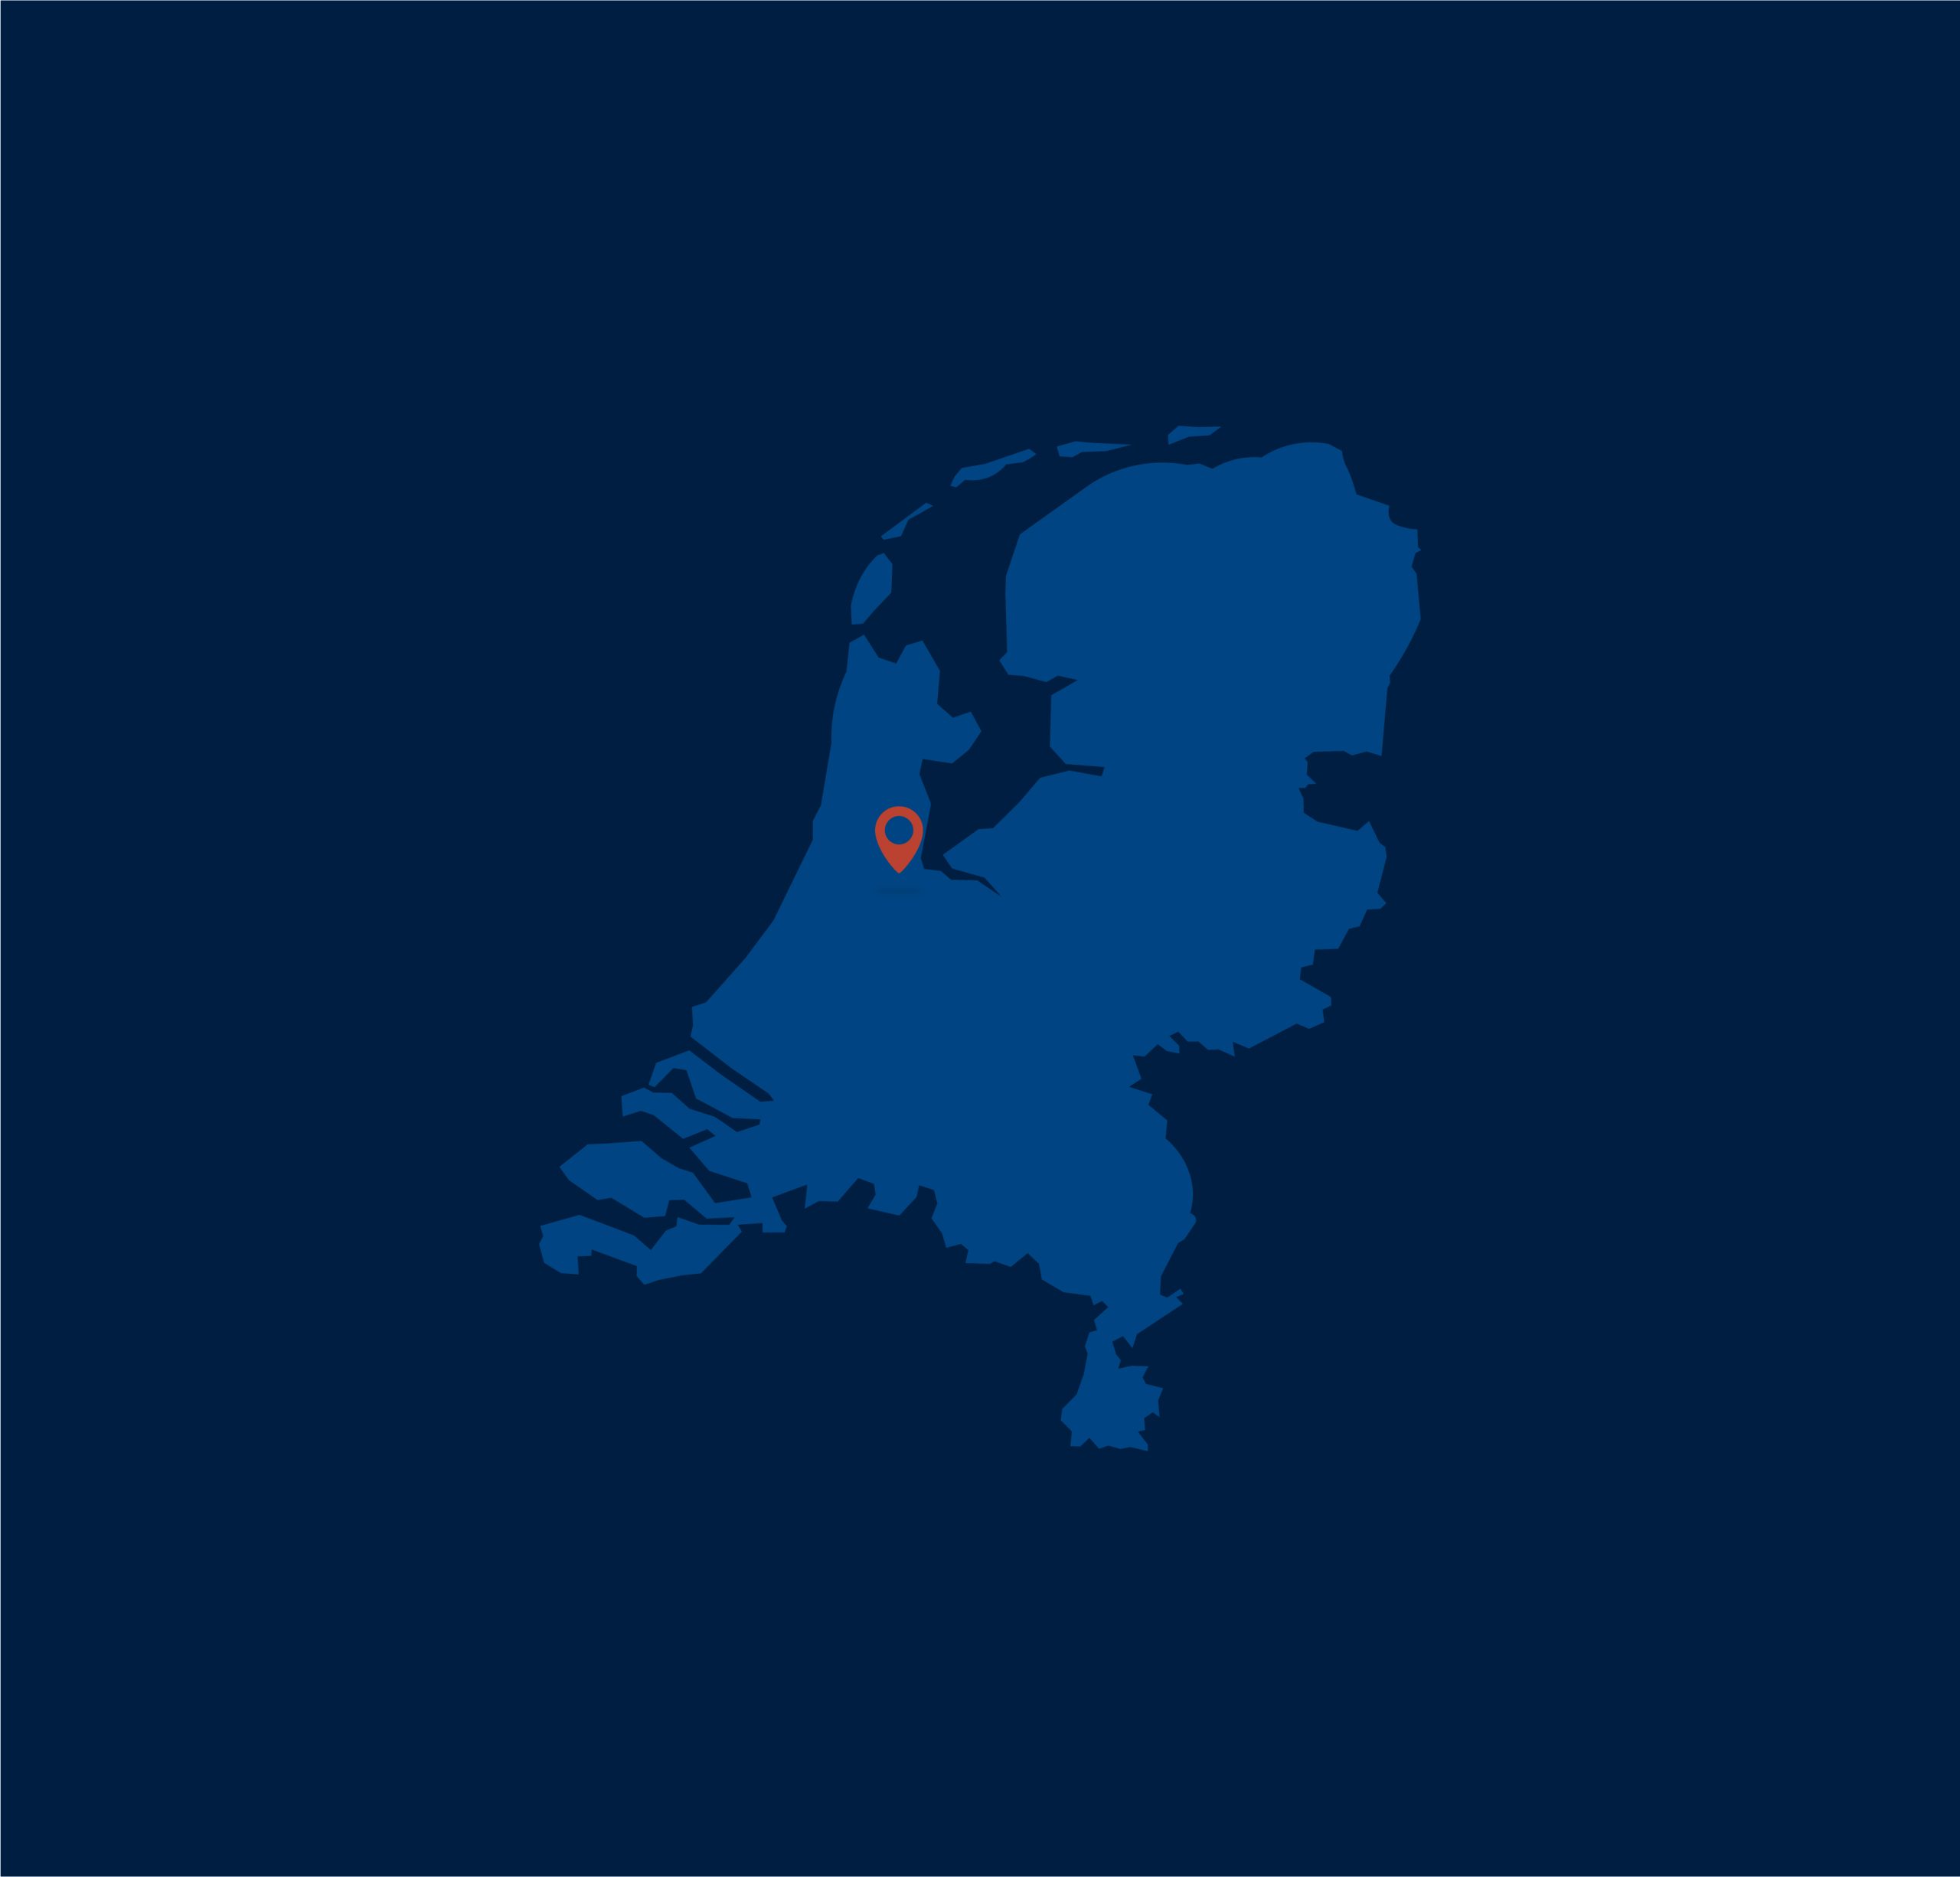 A map showing the VANEPS location in Amsterdam